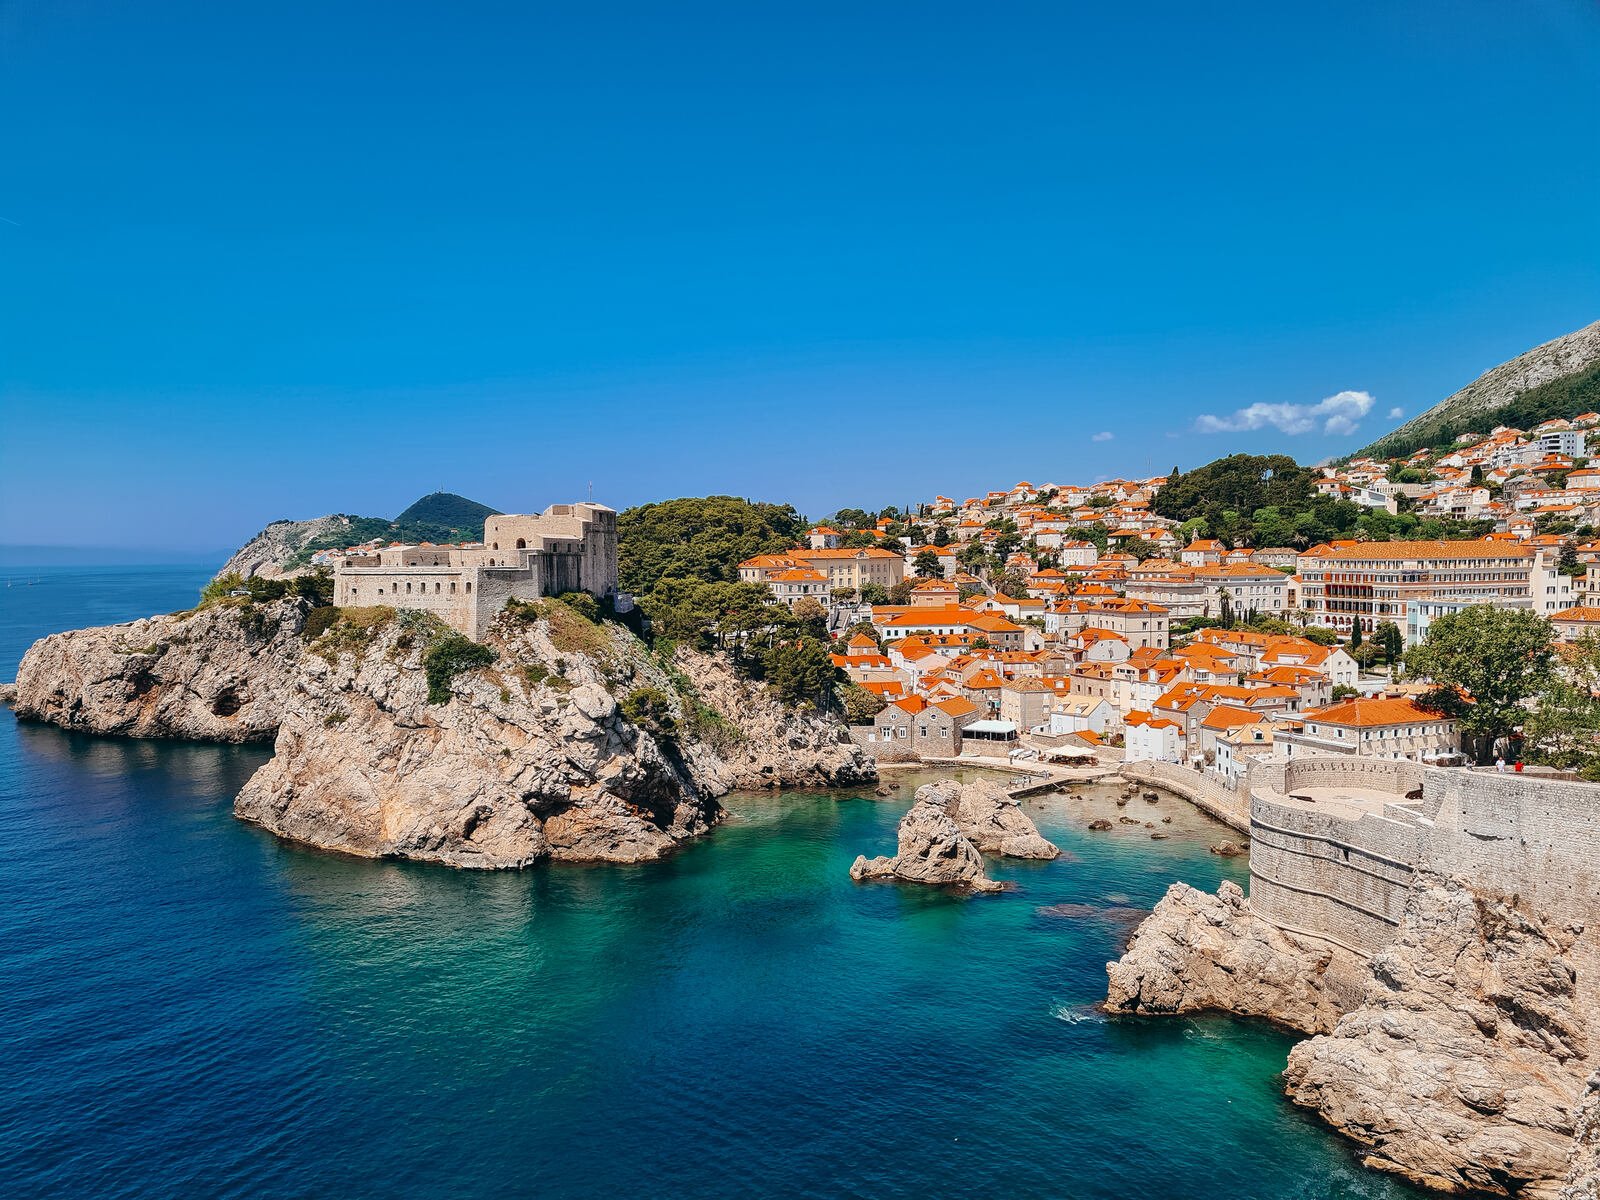 A panorama view looking out across a bay with blue and turquoise water, rock cliffs along the right with a small beach, houses with orange rooftops along the water and a large stone fortress on the rocky cliff opposite in Dubrovnik